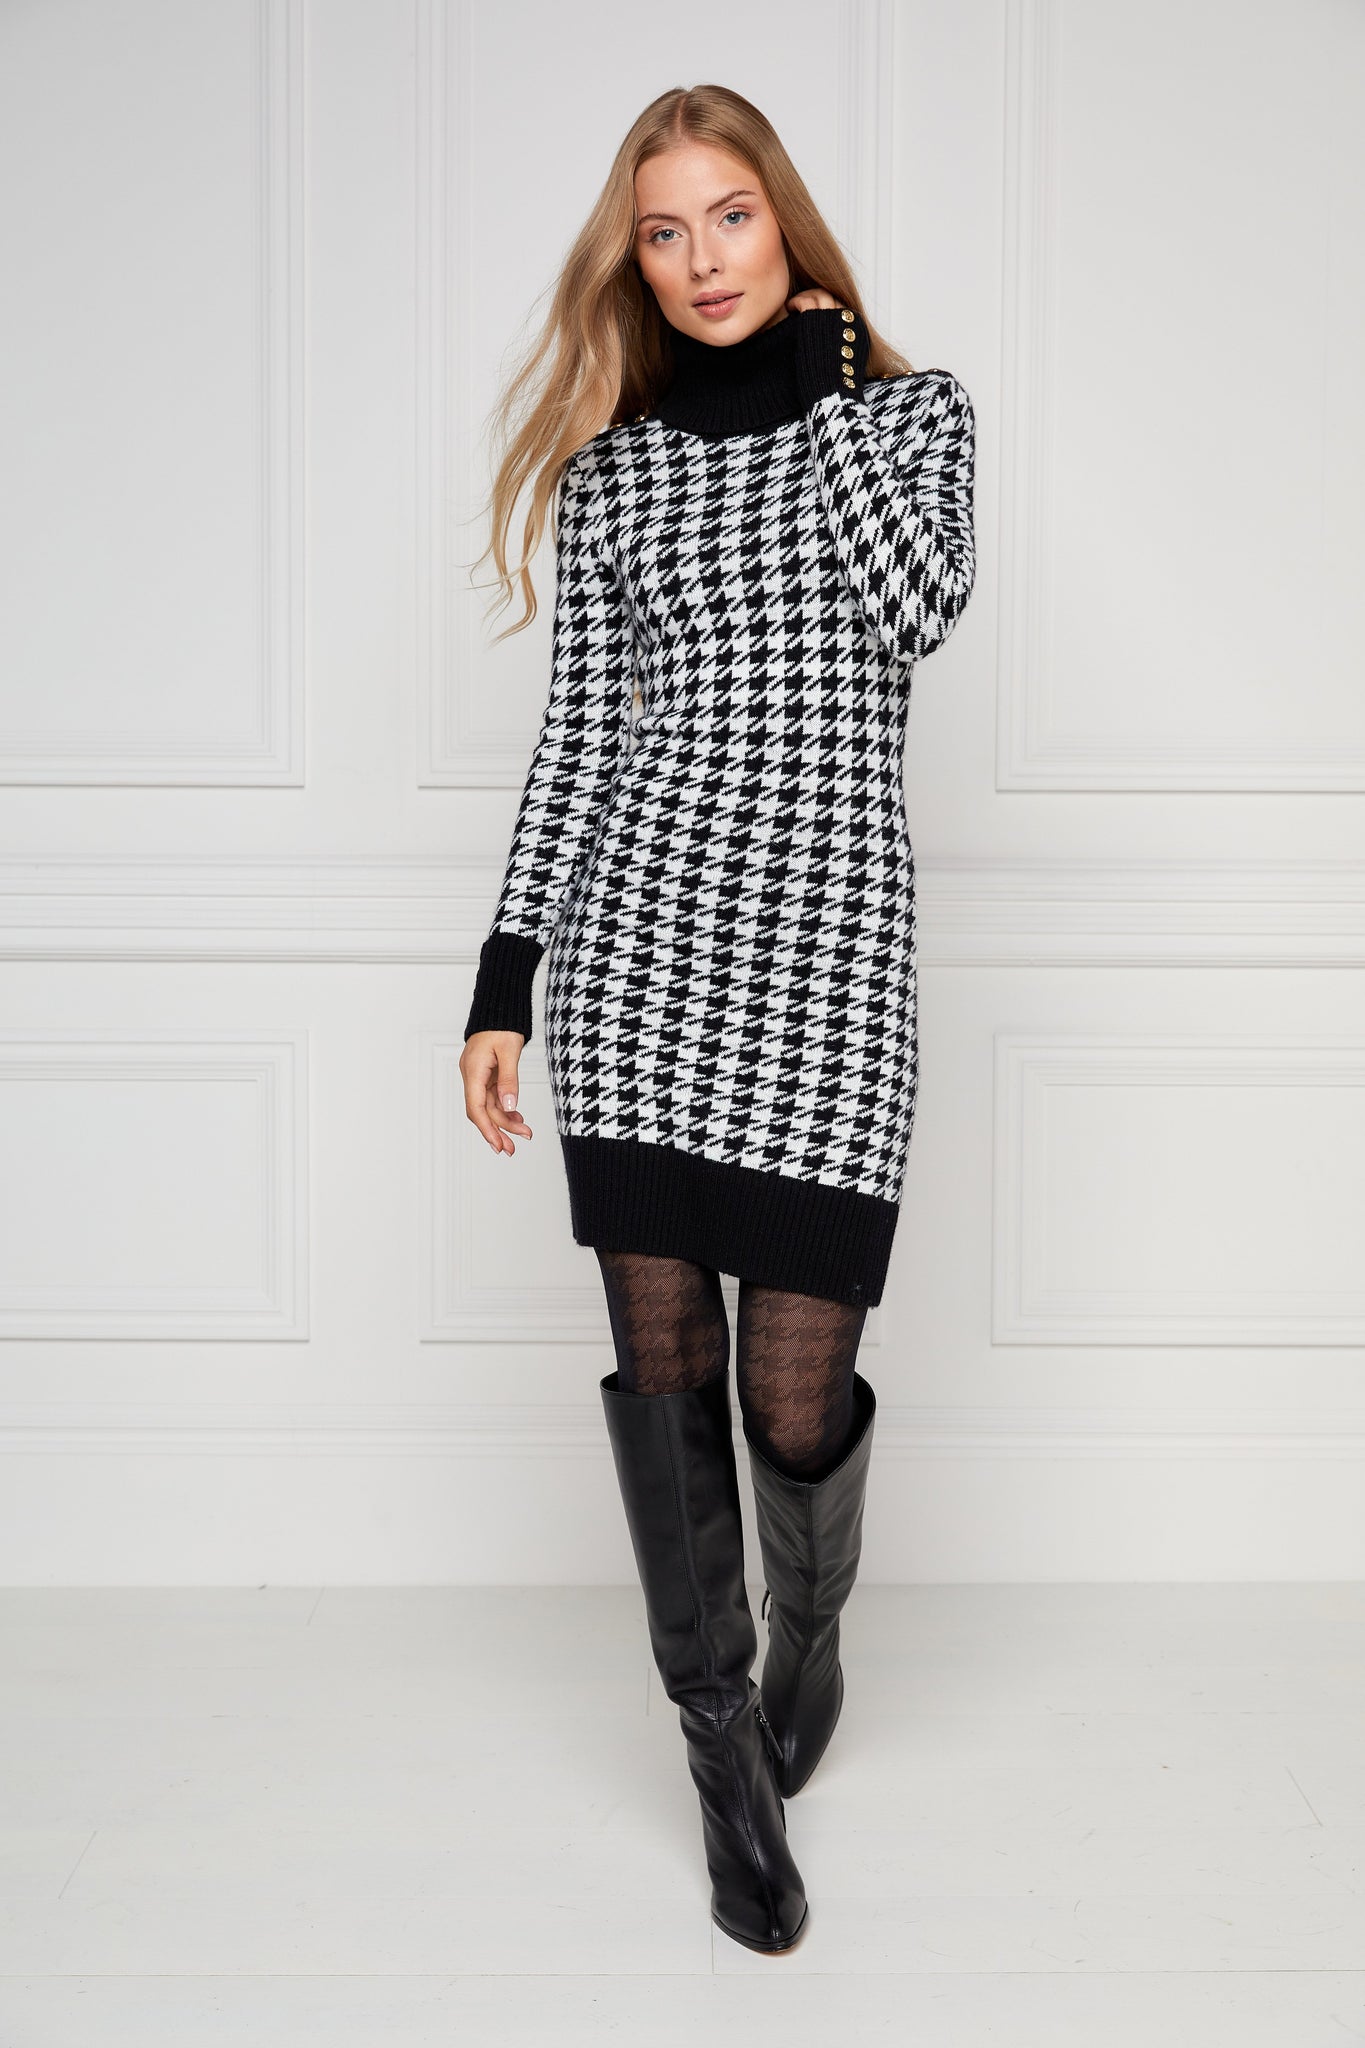 womens black and white houndstooth roll neck jumper dress with contrast black cuffs and ribbed hem with gold button detail on the cuffs and shoulders